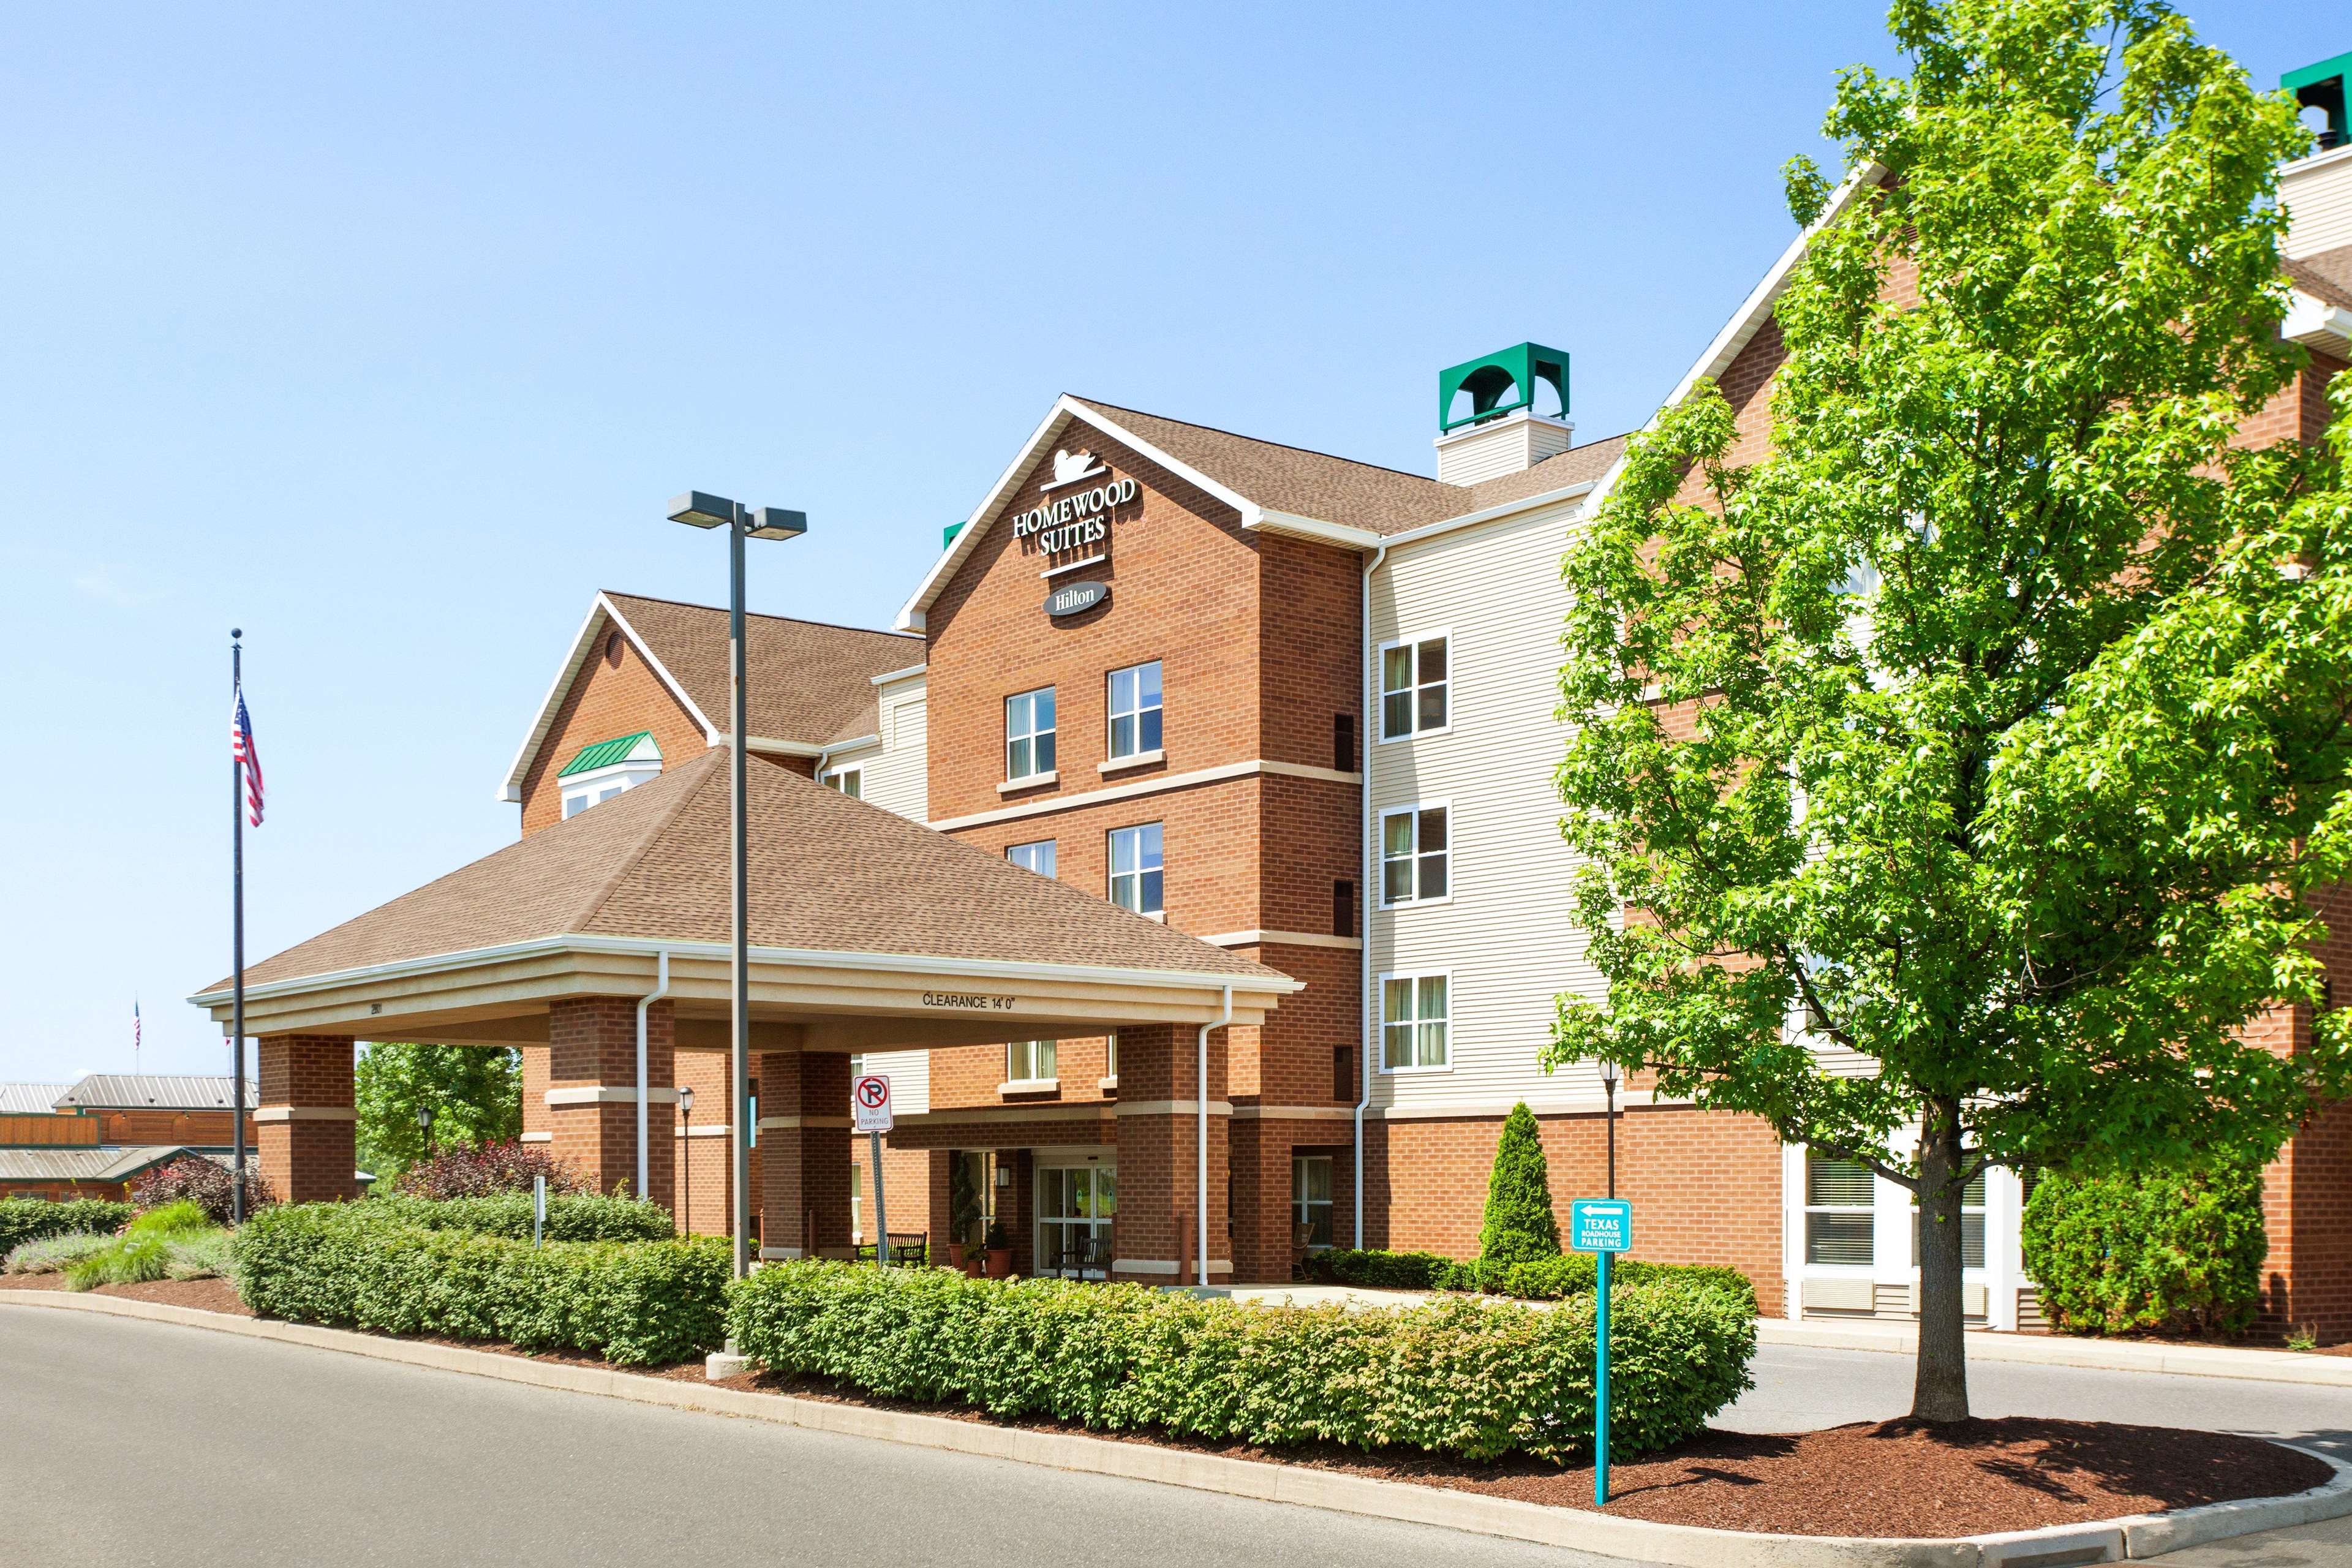 Homewood Suites by Hilton Reading 2801 Papermill Road Reading, PA